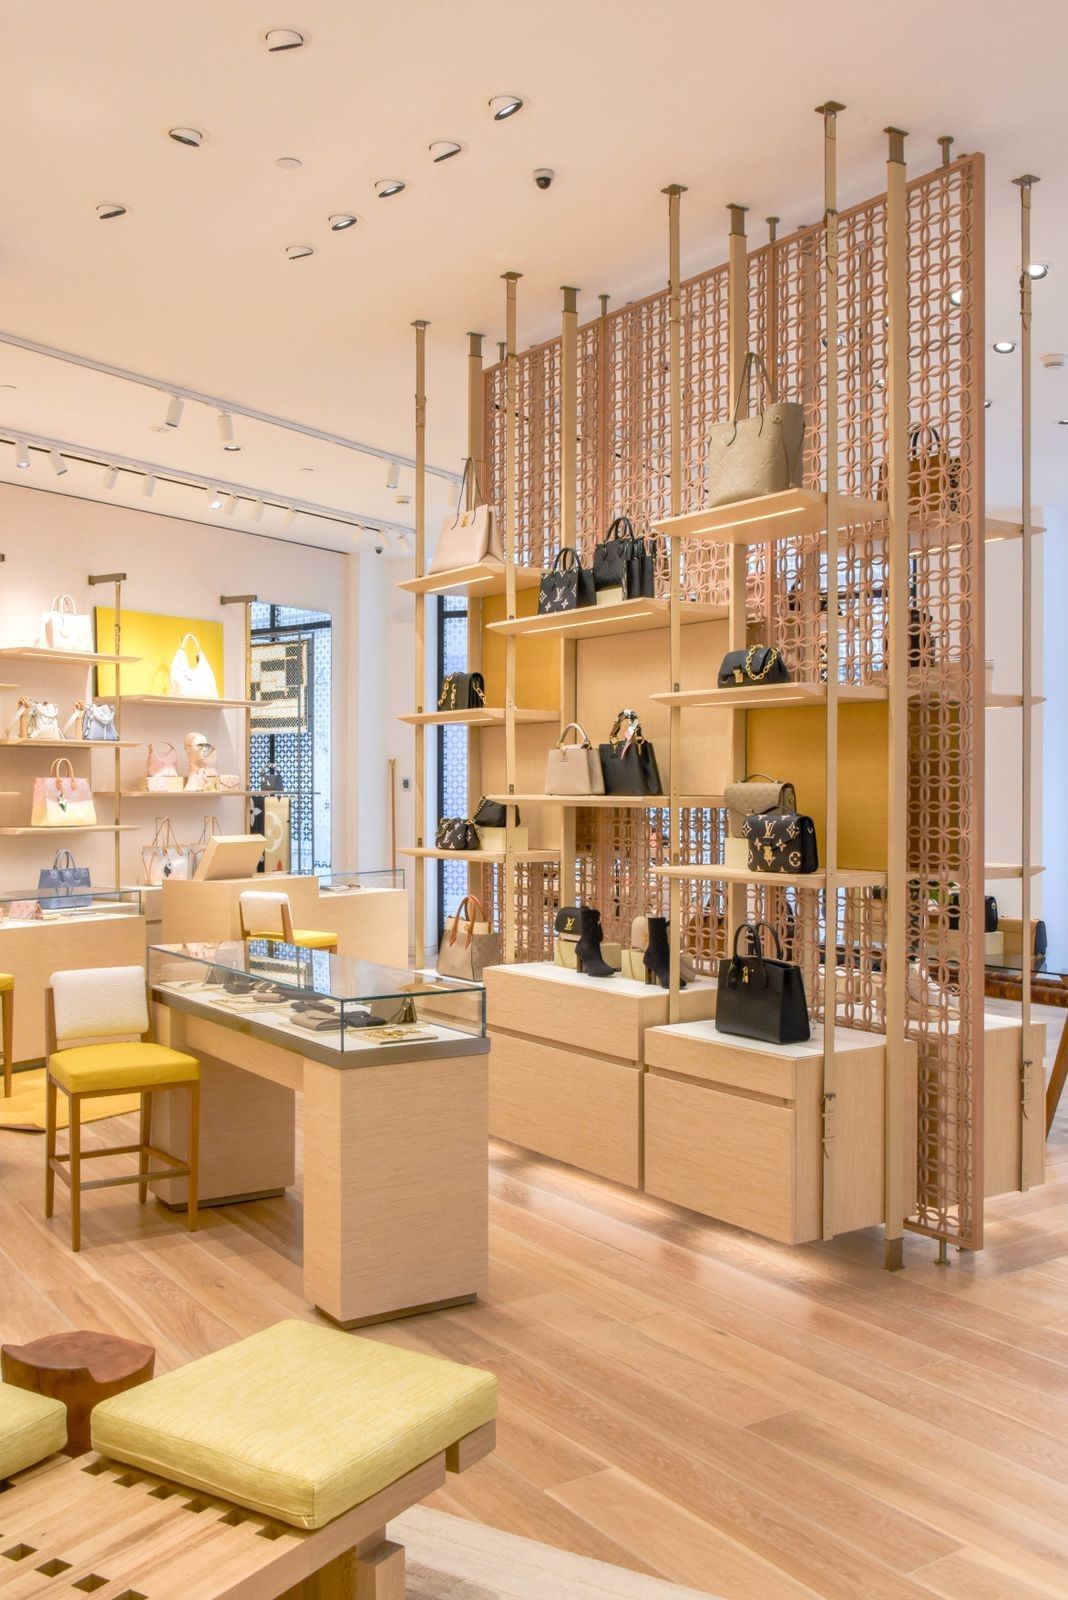 First Ever Louis Vuitton Store Opened In Peru - Luxferity Magazine